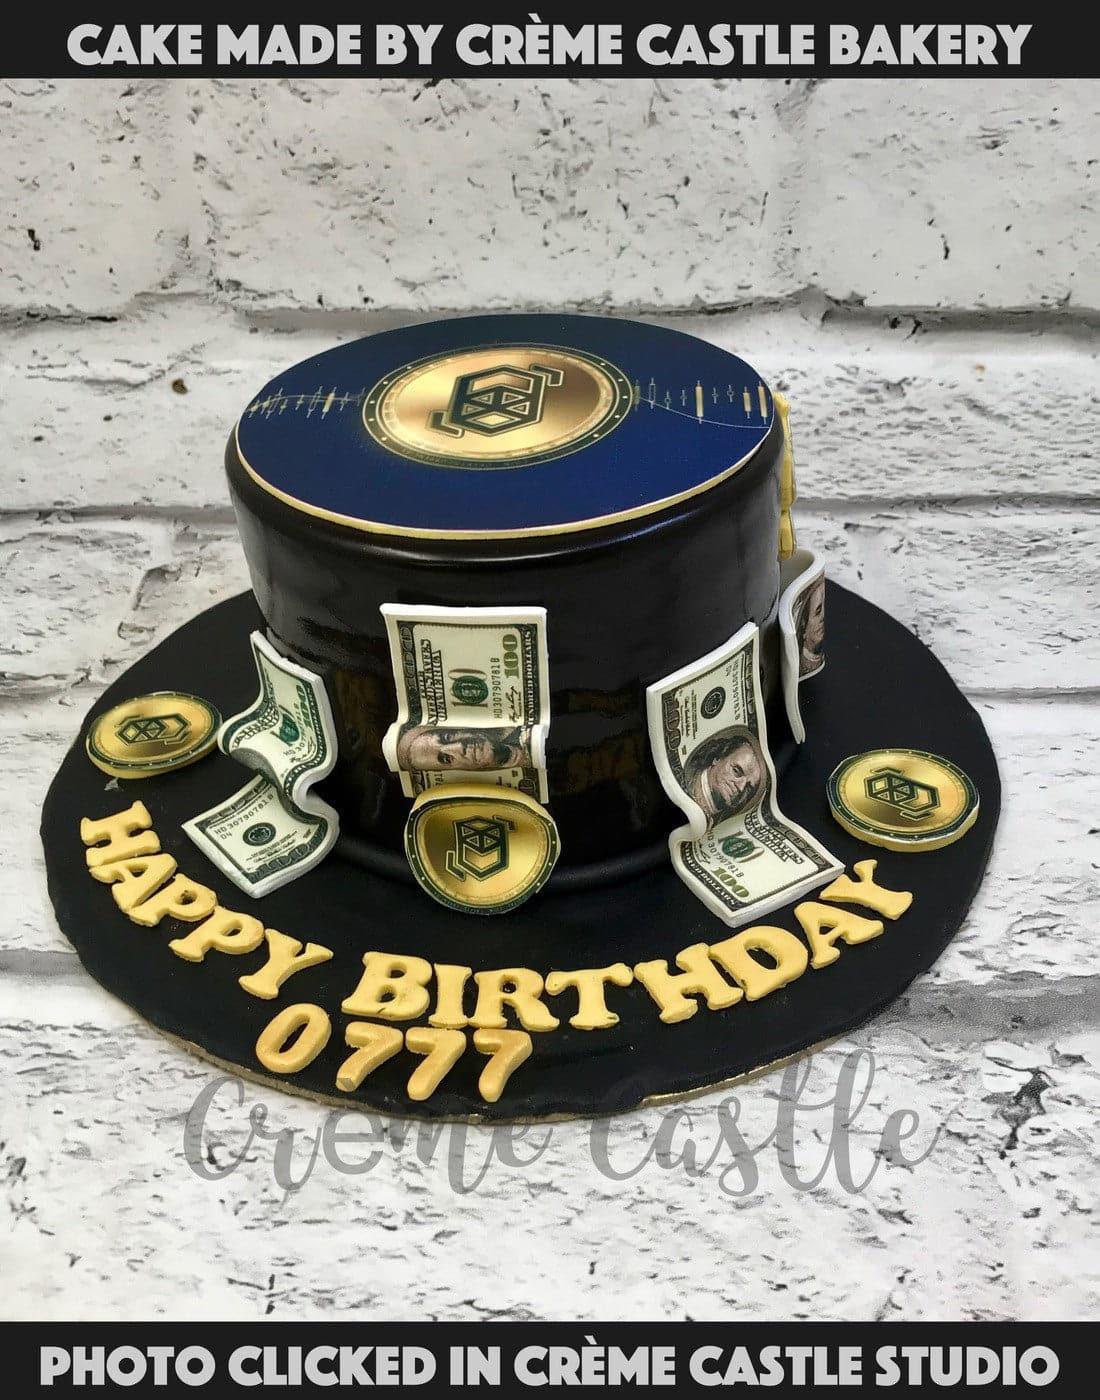 🎂 Happy Birthday Bill Cakes 🍰 Instant Free Download